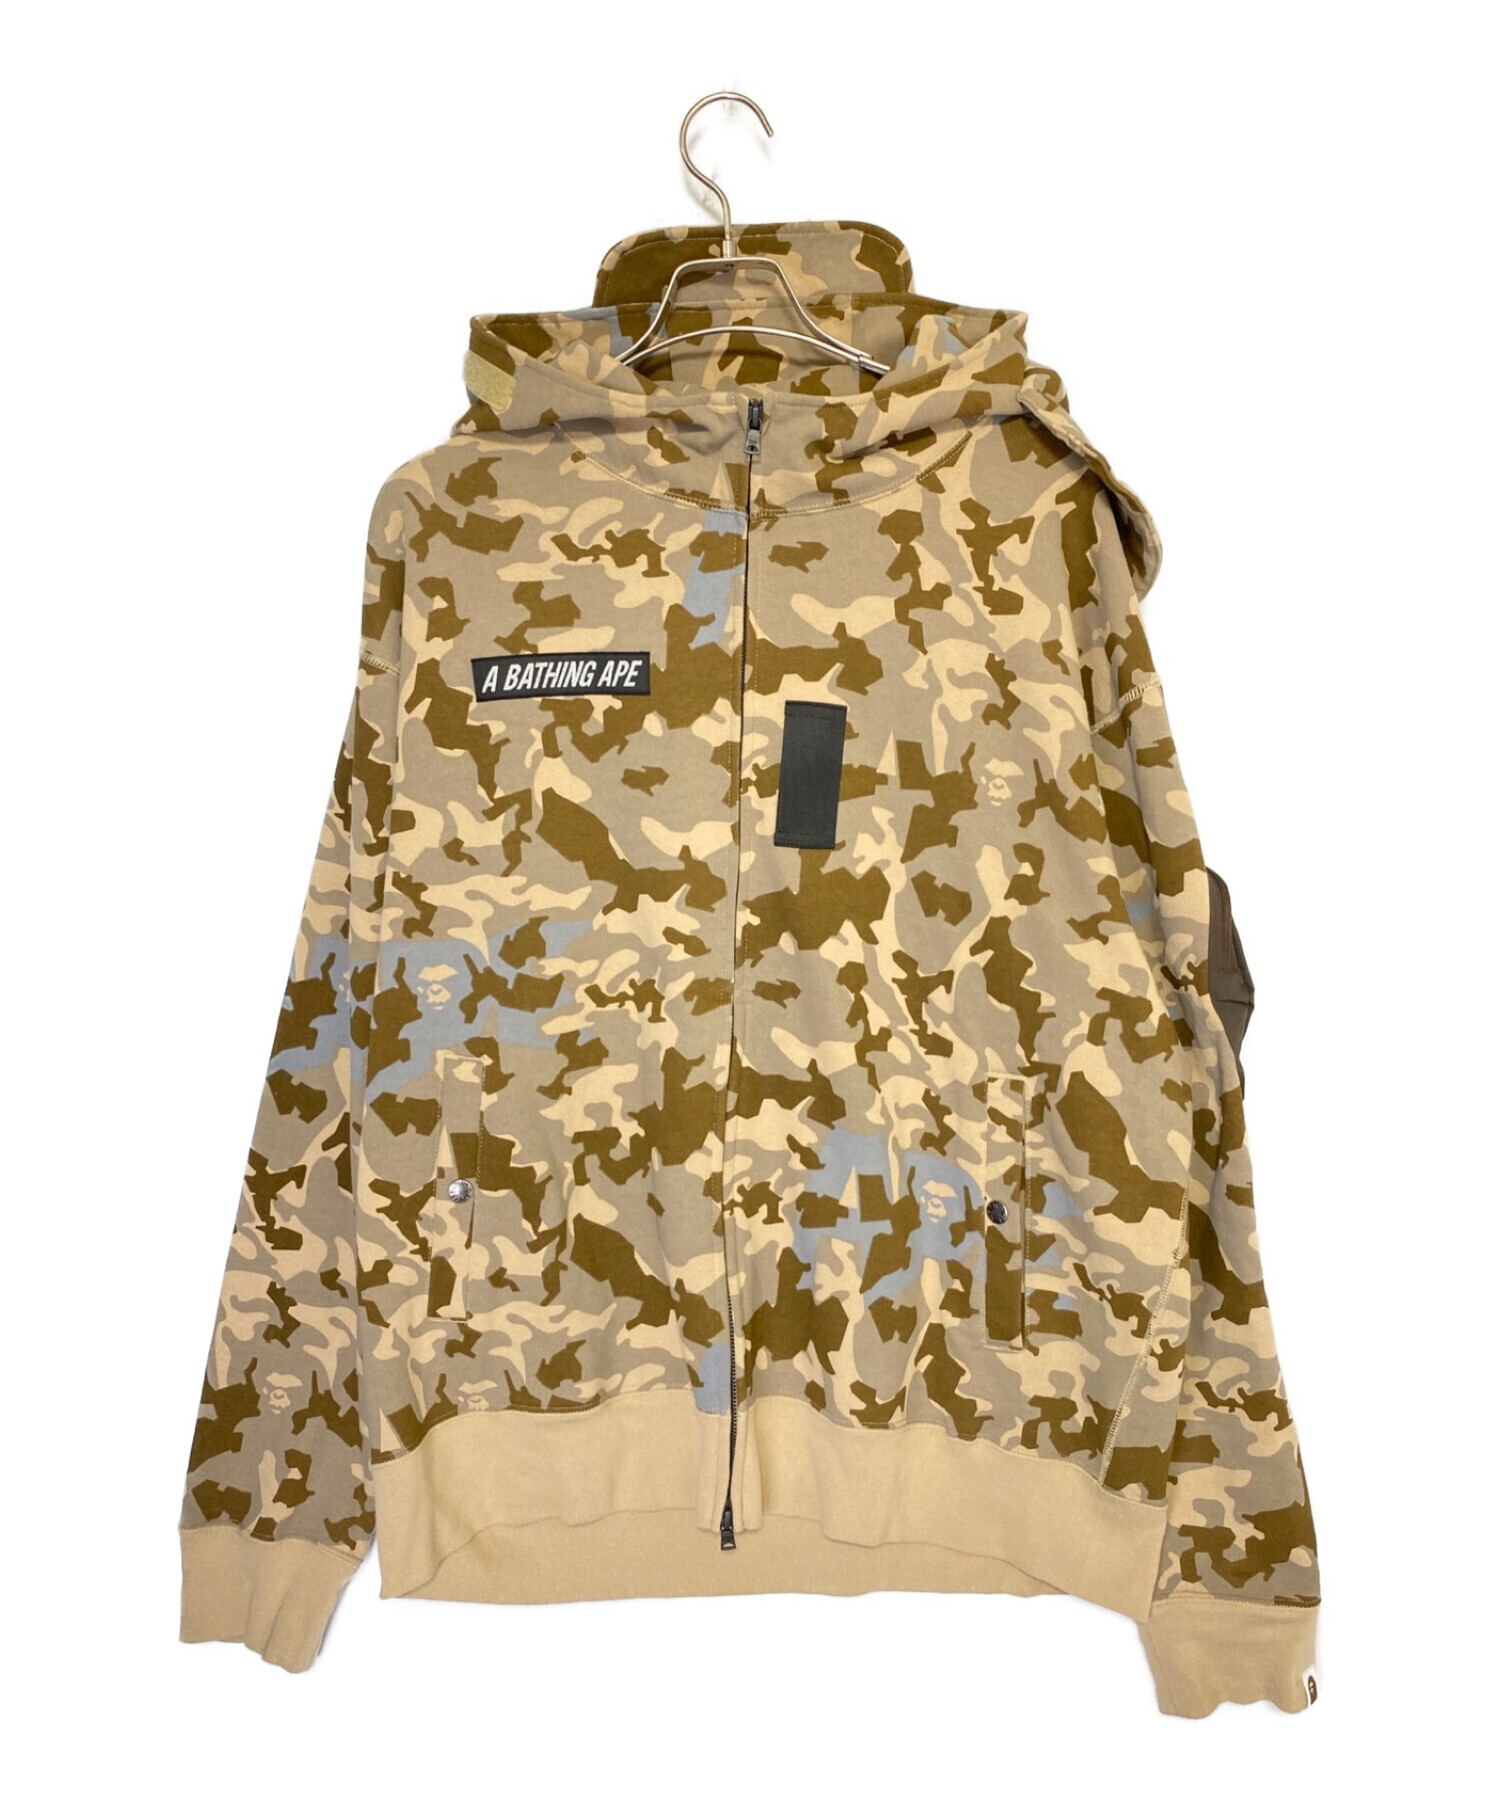 A BATHING APE (ア ベイシング エイプ) SAND CAMO MILITARY RELAXED FIT FULL ZIP MASK  HOODIE カーキ サイズ:XL